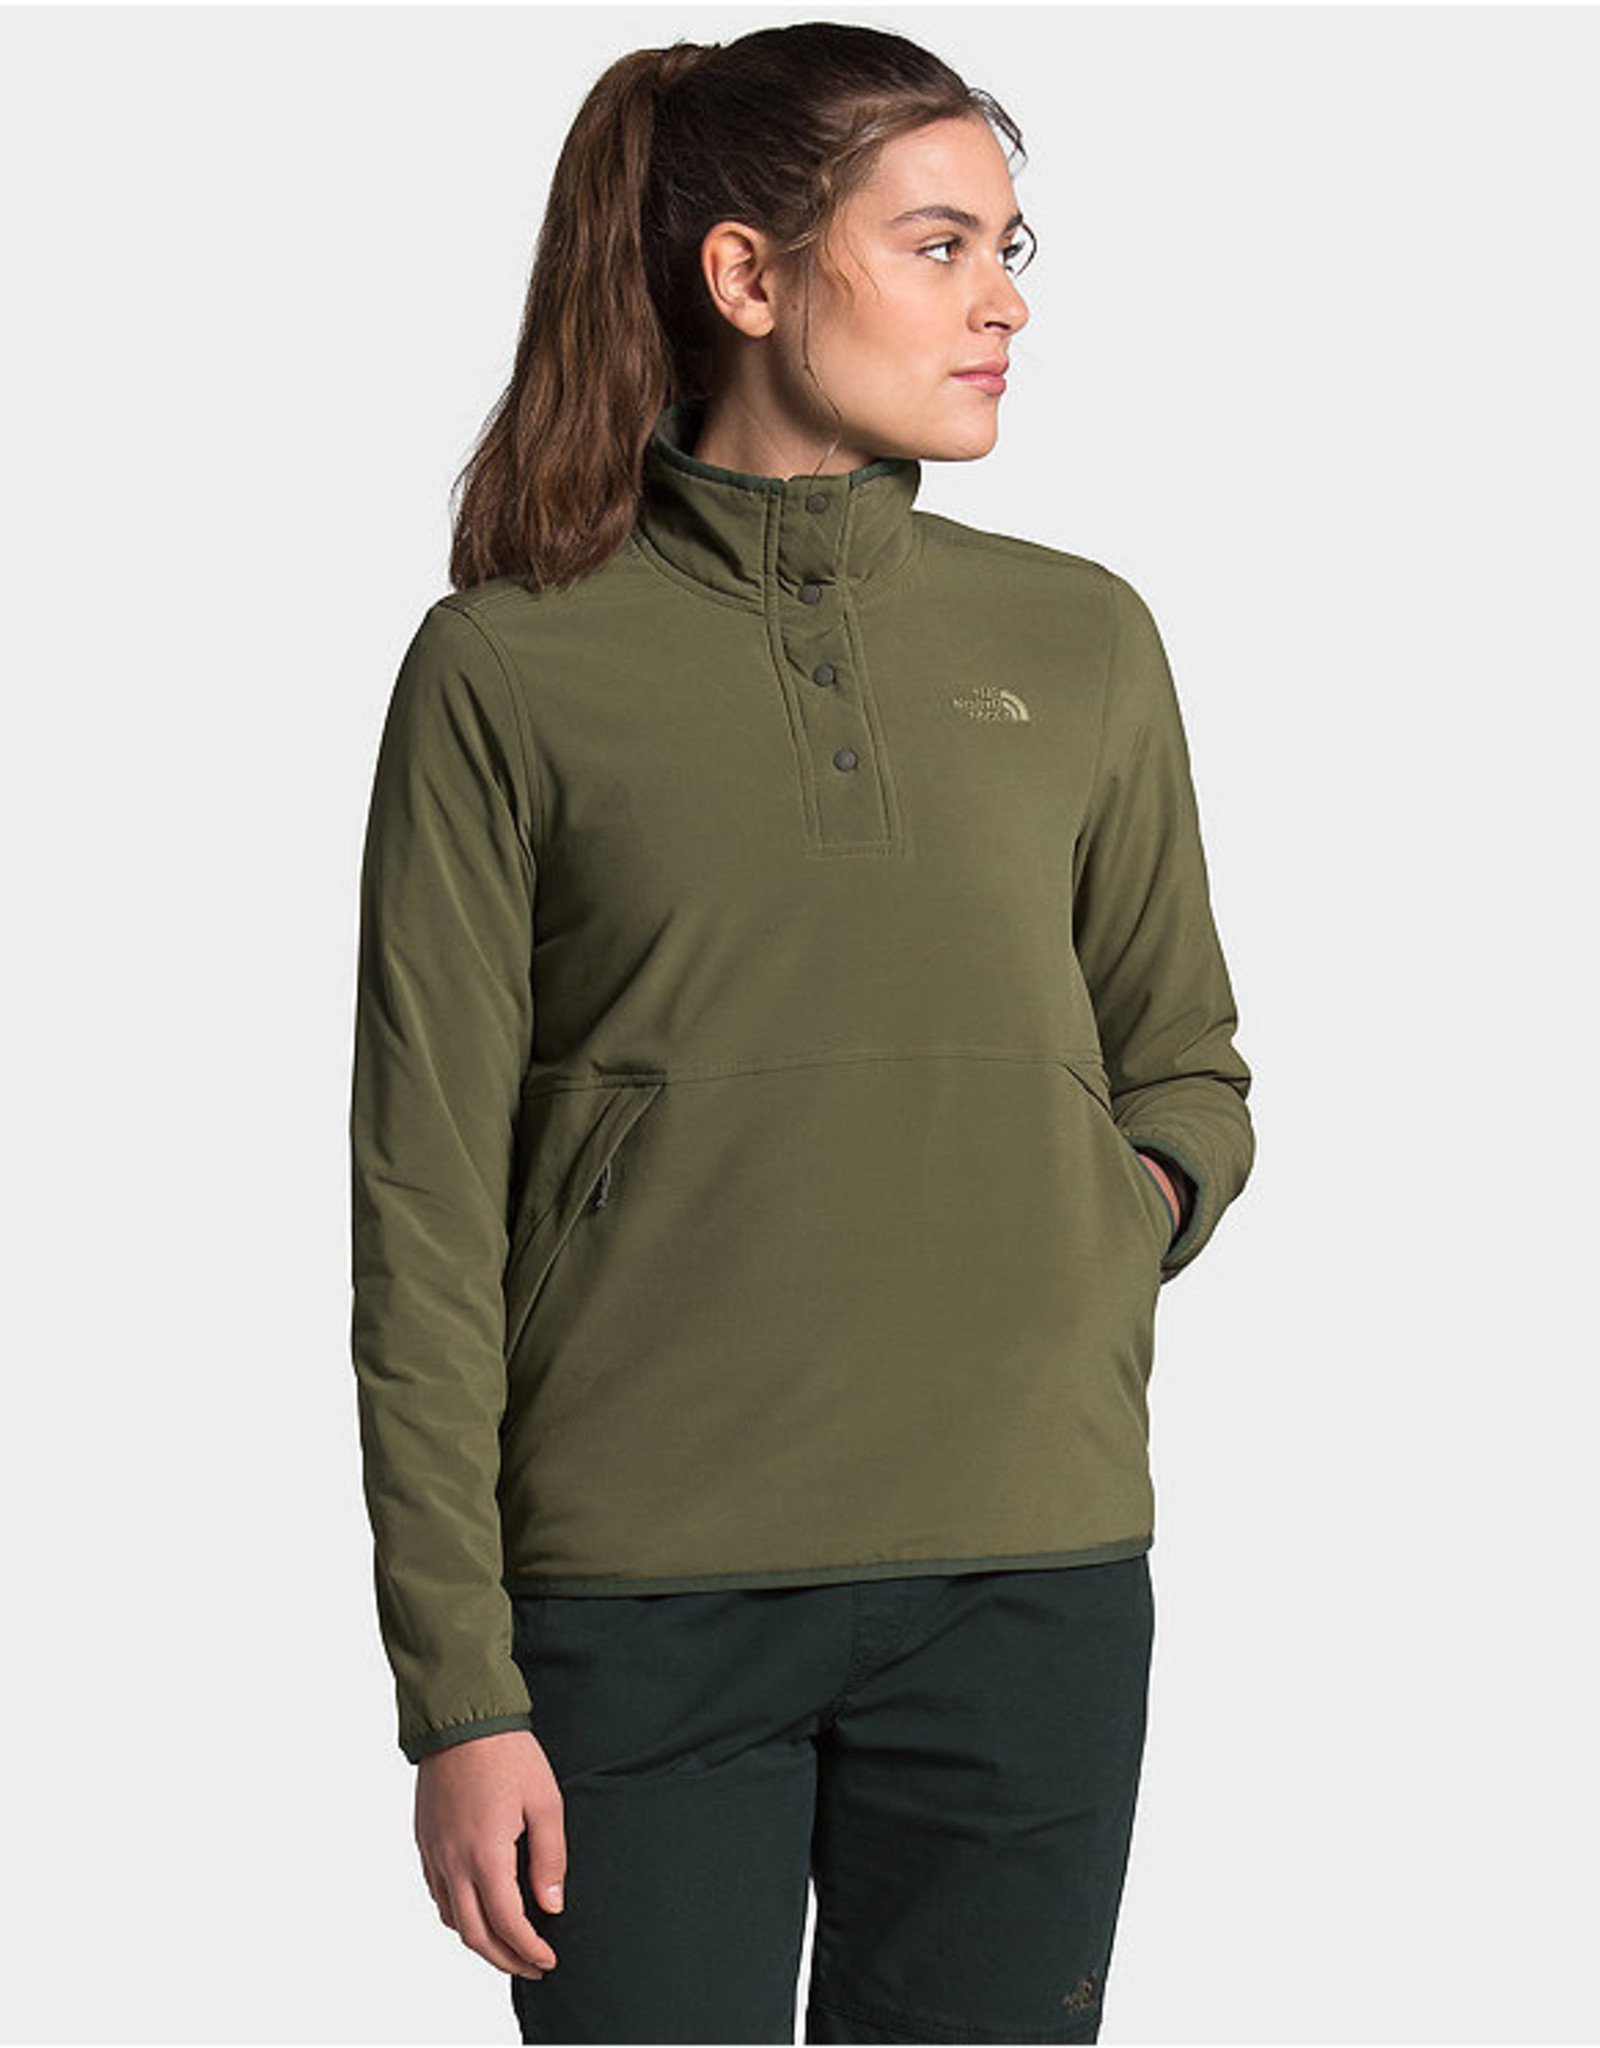 The North Face The North Face Women's Mountain Sweatshirt Pullover 3.0 -W2020